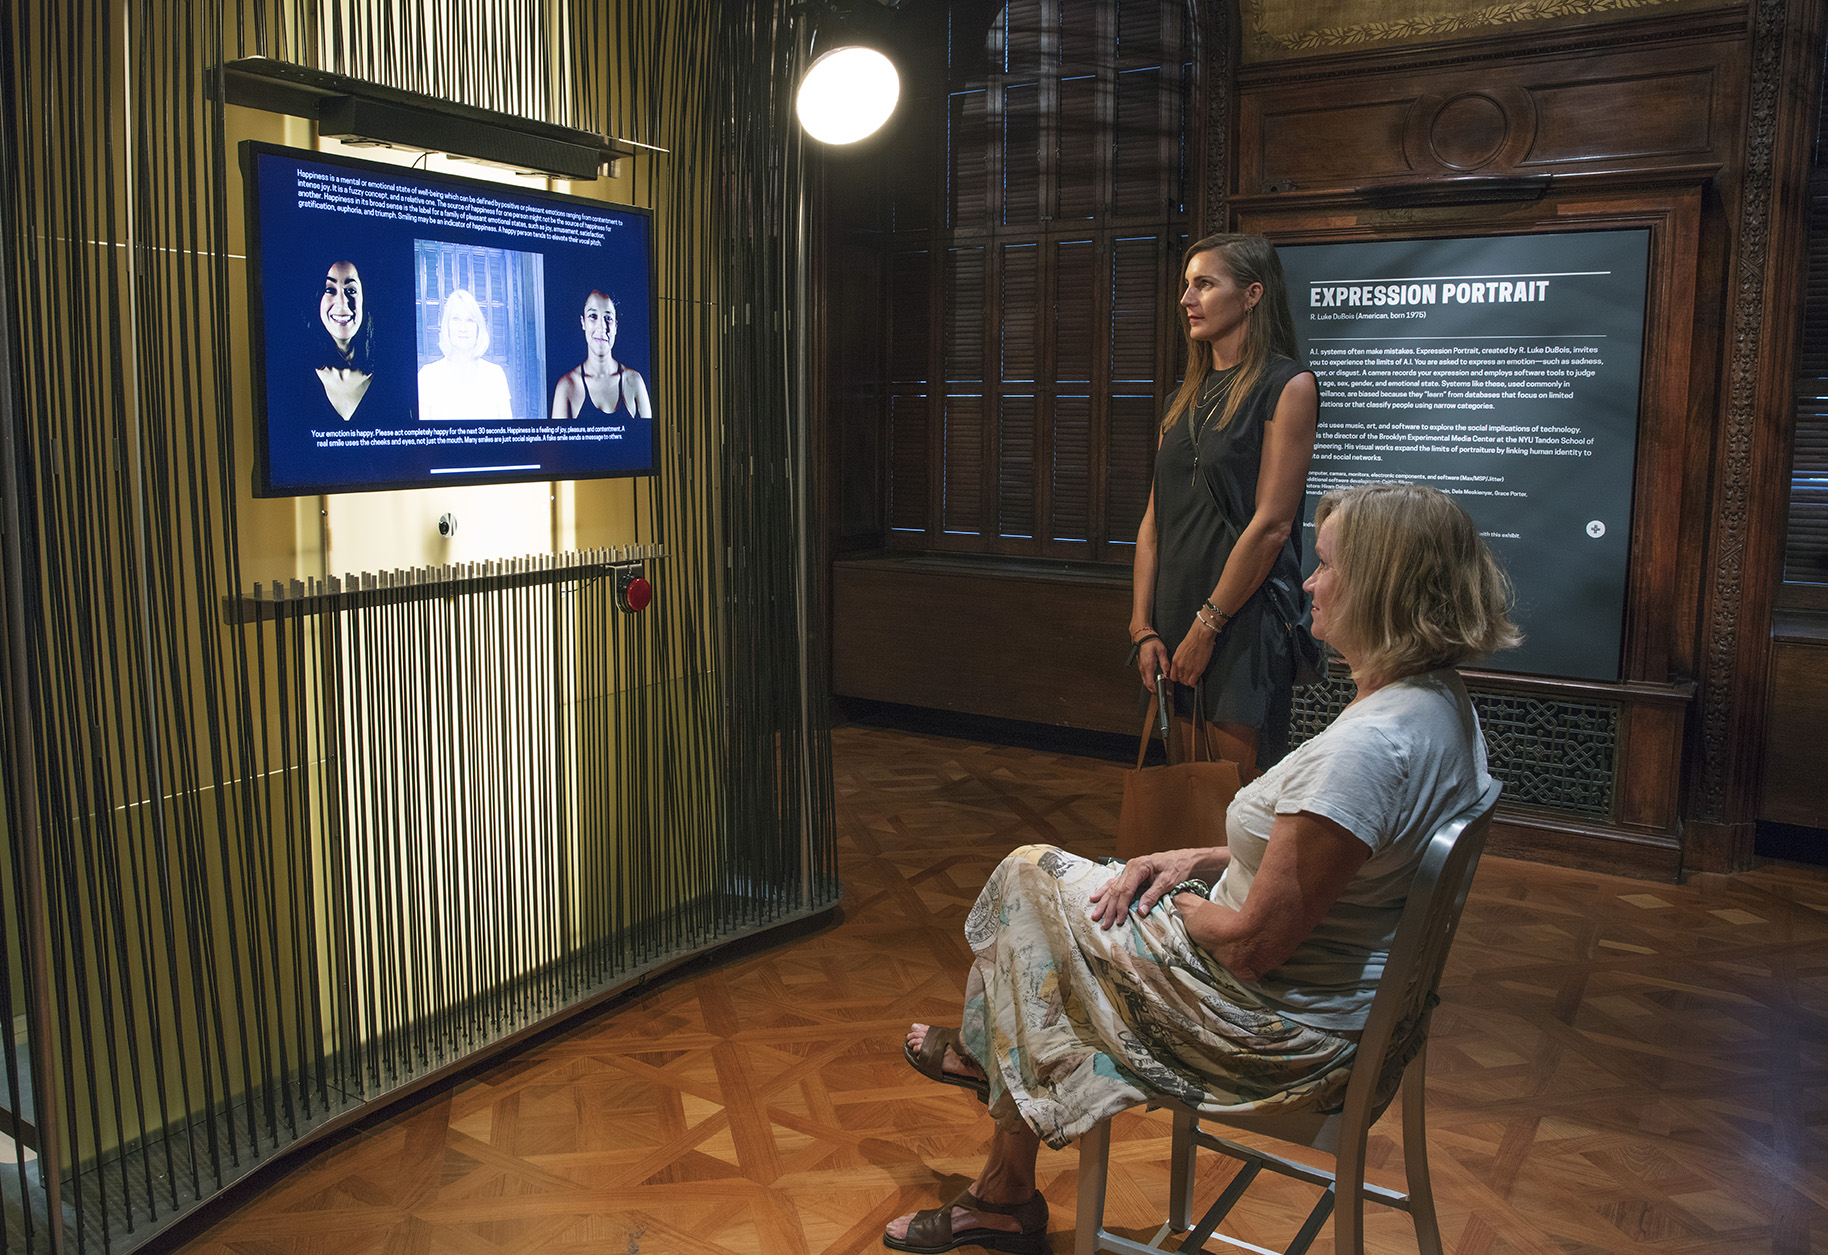 Two women, one seated and one standing, are positioned in a gallery space. They both look intently at a video monitor affixed to a wall covered in dozeons of black vertical rods. The monitor shows text, images of two women, and a live feed of the seated onces facial expressions.